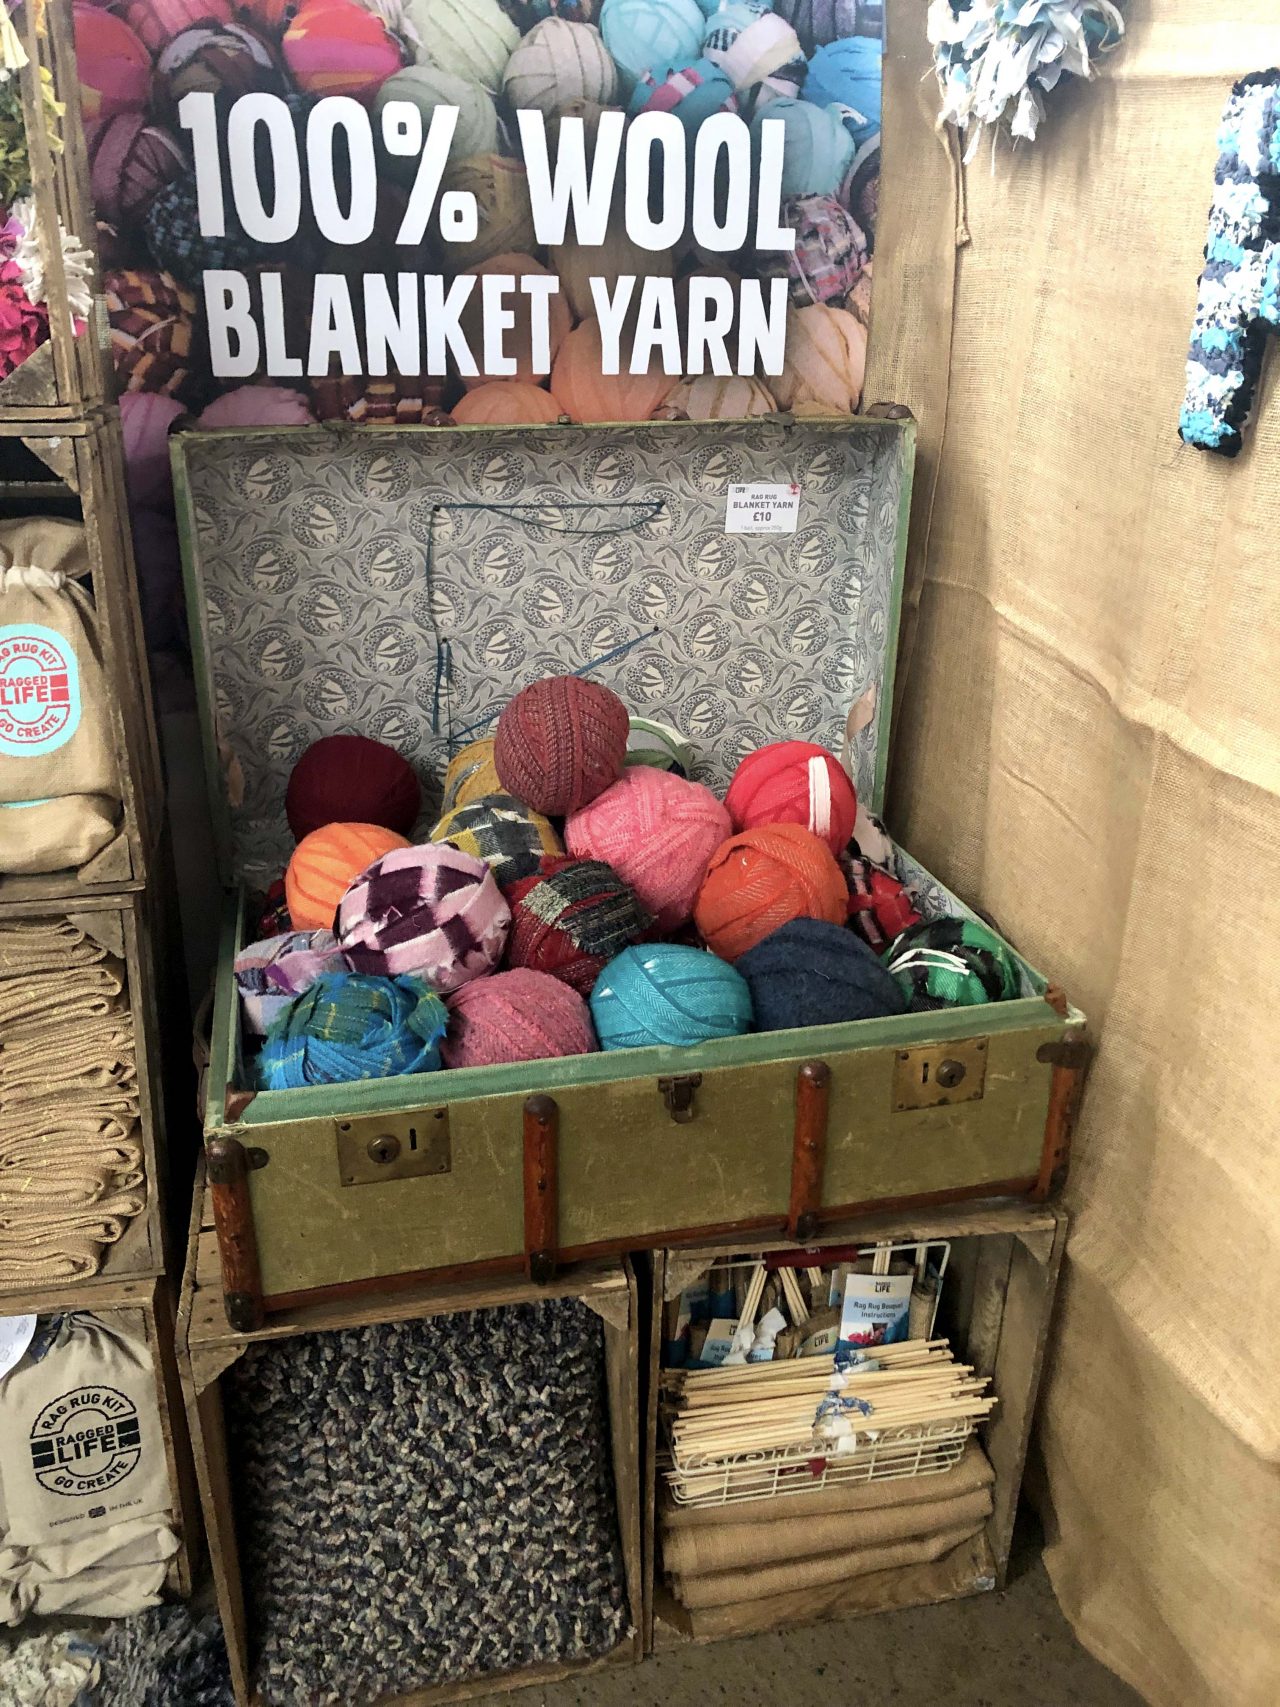 Ragged Life rag rug stand at Woolfest 2019 in Cockermouth, Cumbria festival with balls of multicoloured blanket yarn